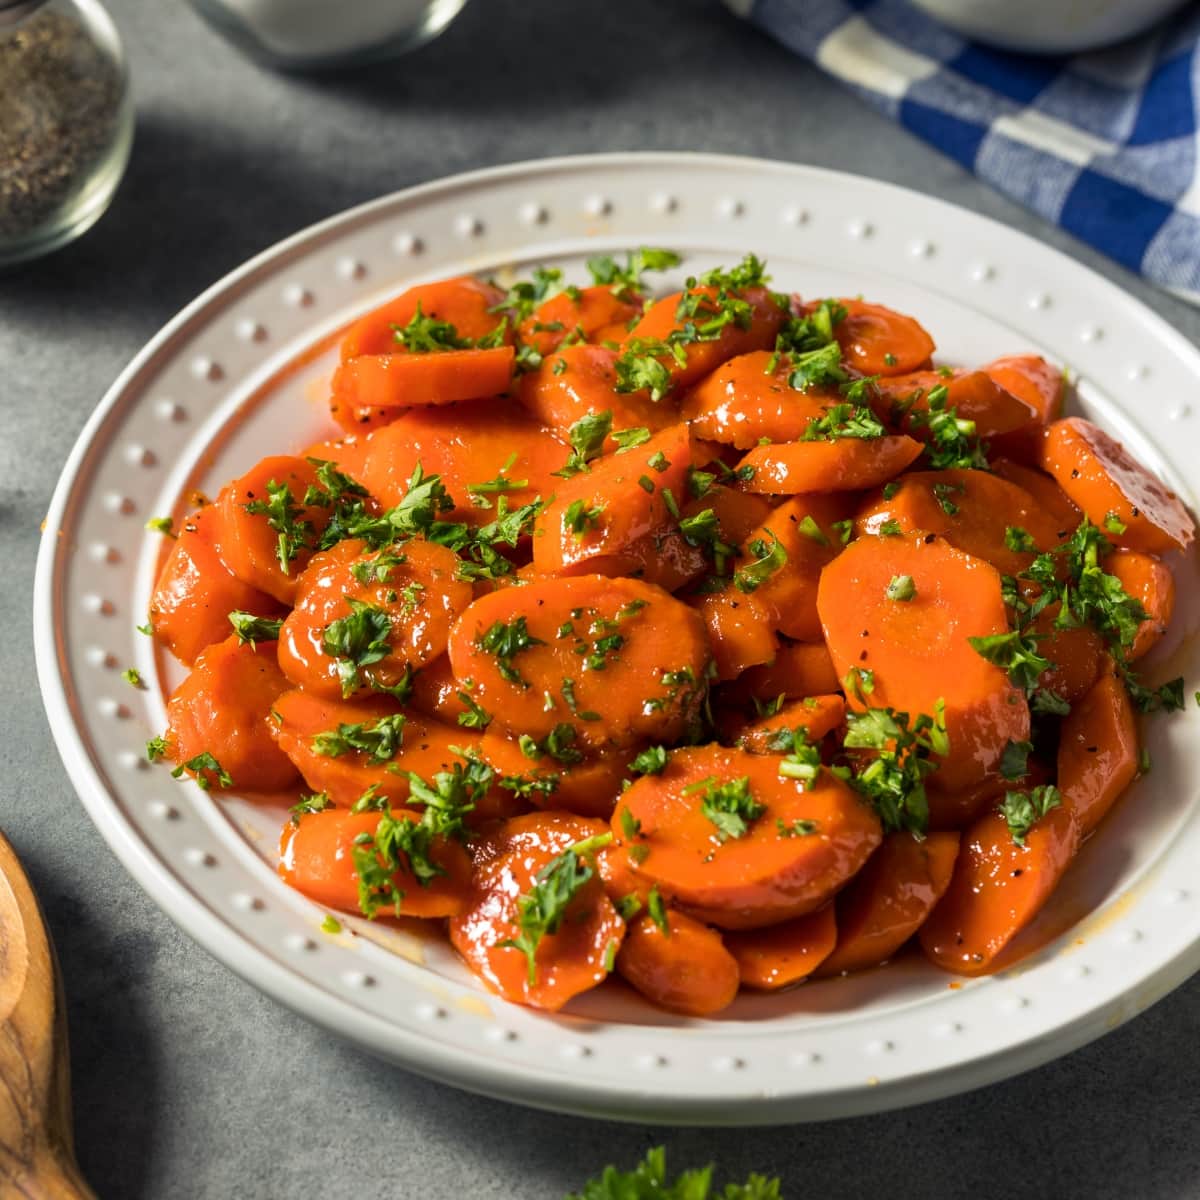 Glazed, Candied Carrots with Parsley on a White Plate with a Wooden Spoon Beside The Plate